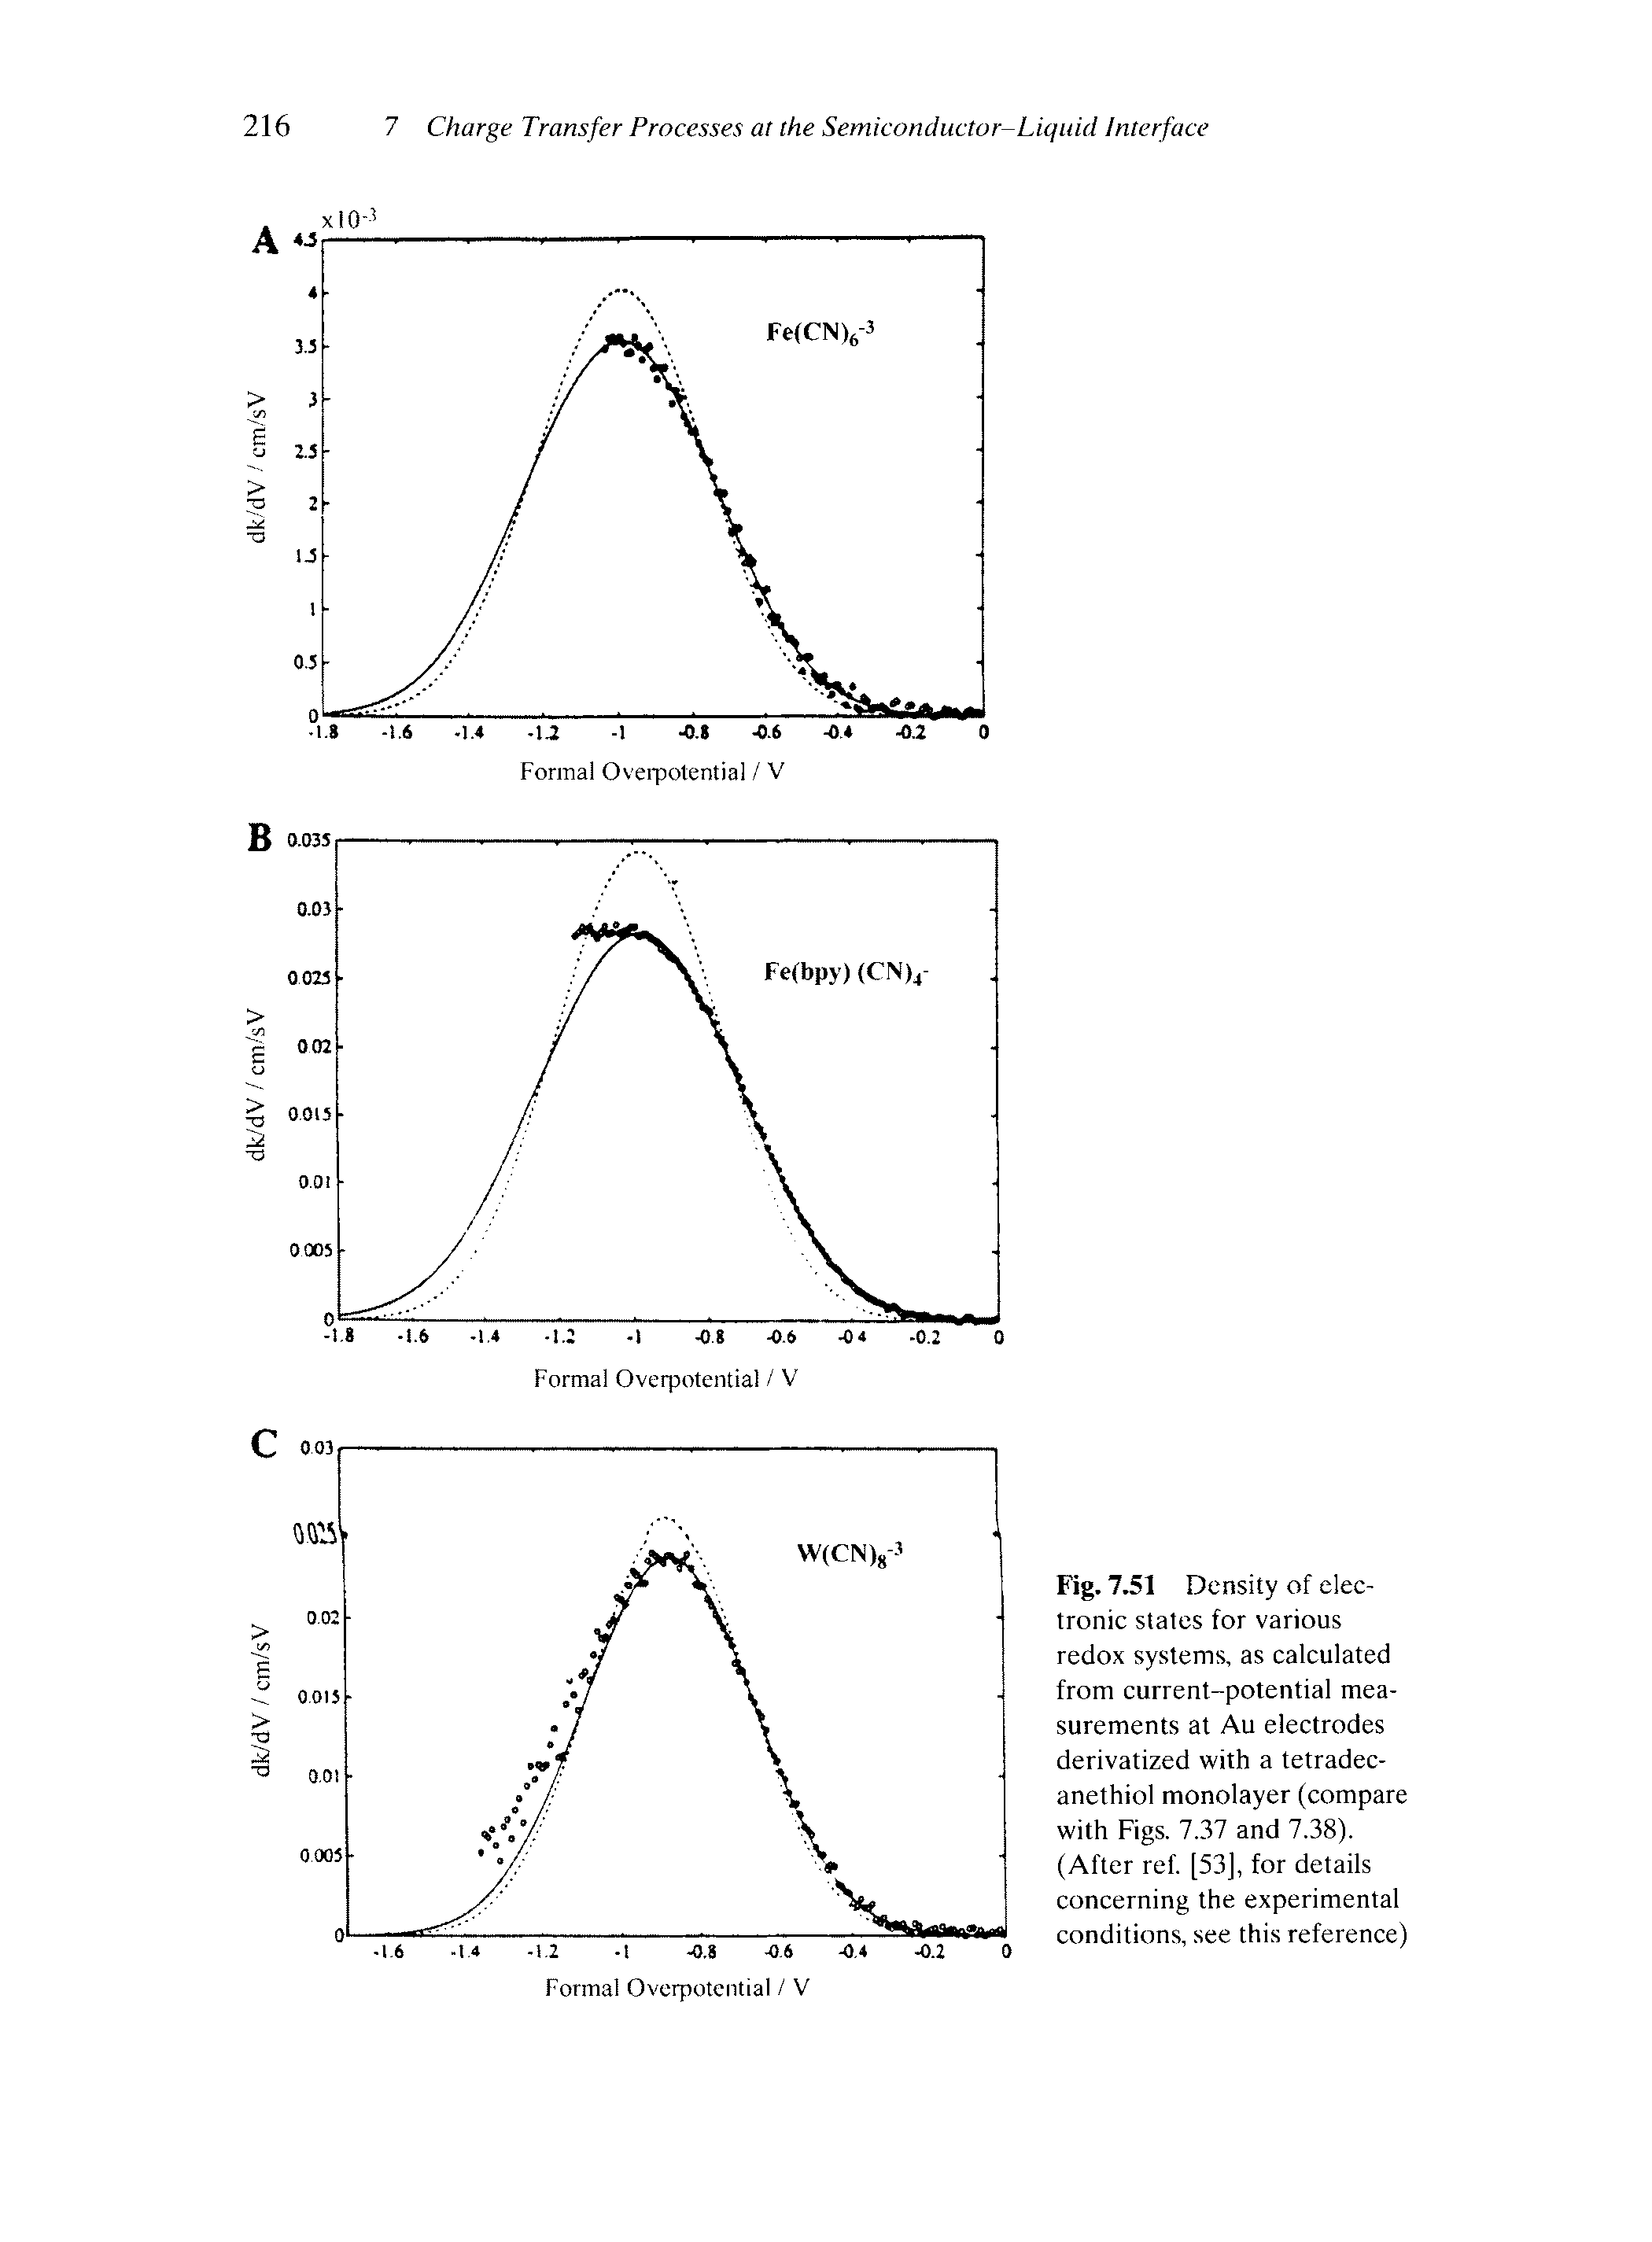 Fig. 7.51 Density of electronic states for various redox systems, as calculated from current-potential measurements at Au electrodes derivatized with a tetradec-anethiol monolayer (compare with Figs. 7.37 and 7.38). (After ref. [53], for details concerning the experimental conditions, see this reference)...